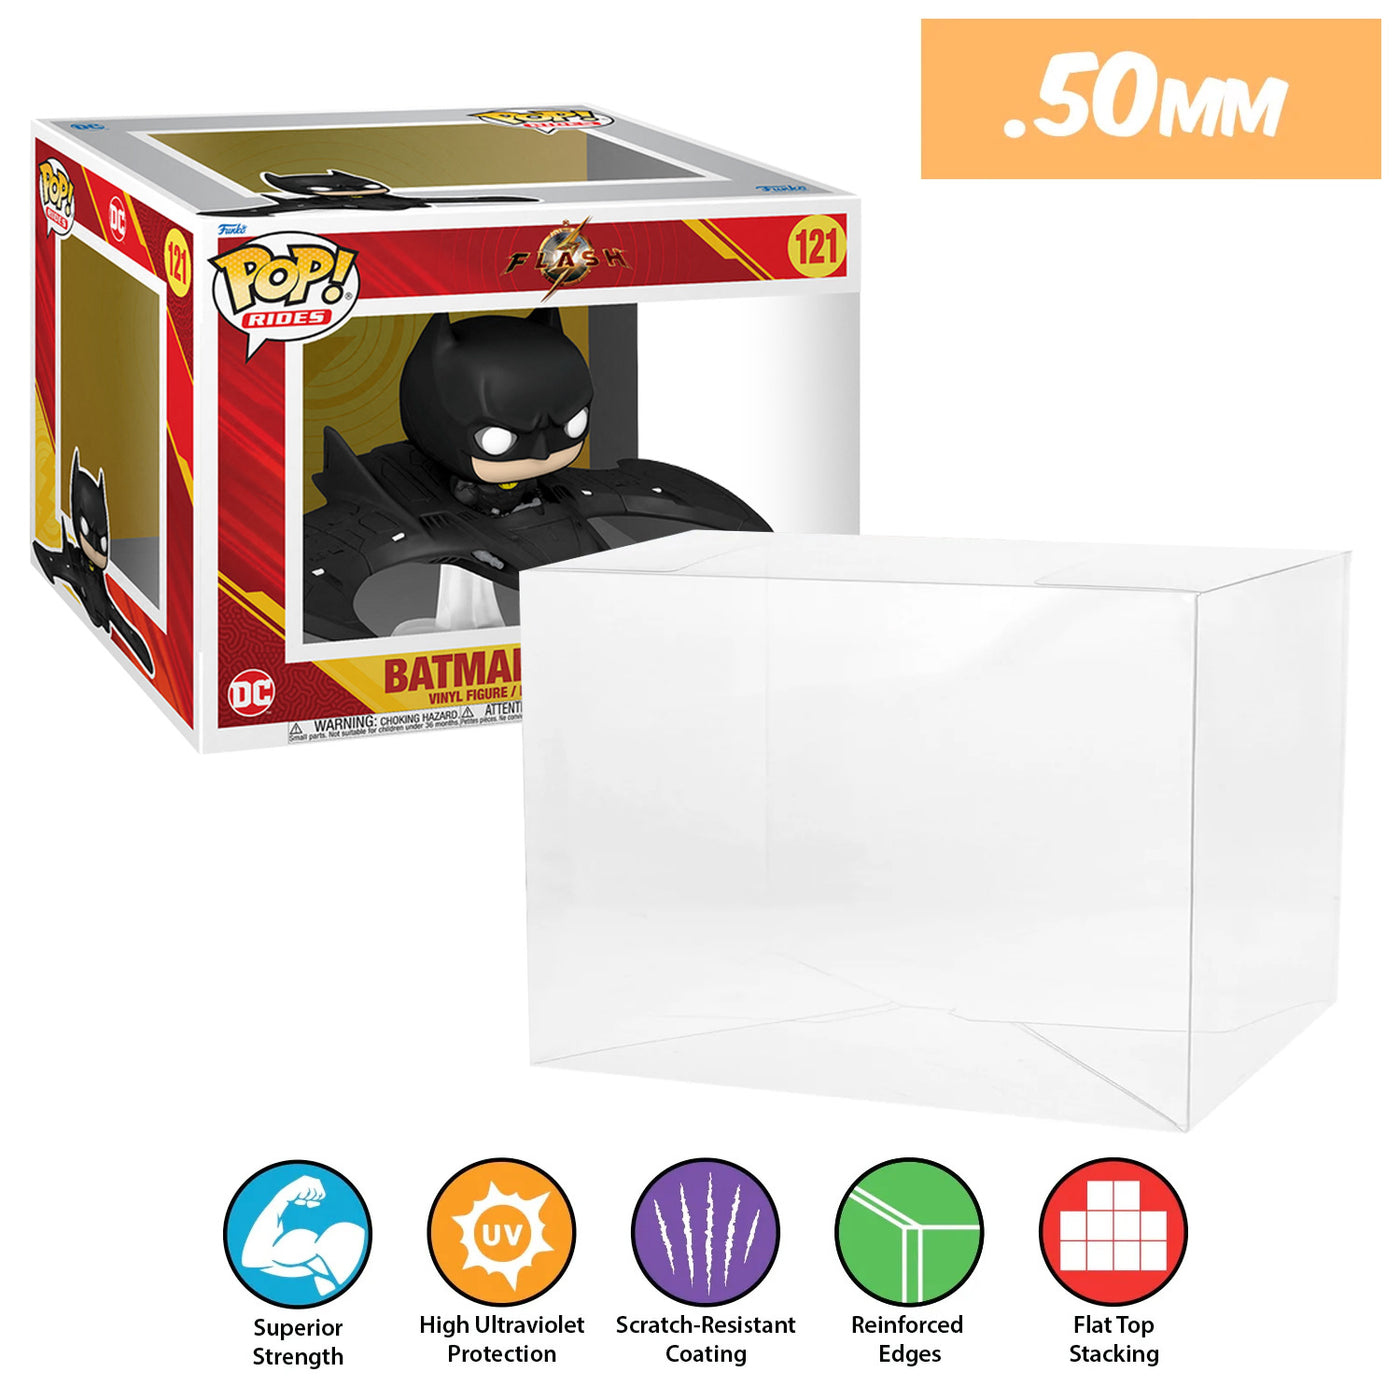 Formula 1 Funko Pop Rides  This Is What Funko Needs To Make More Of! 